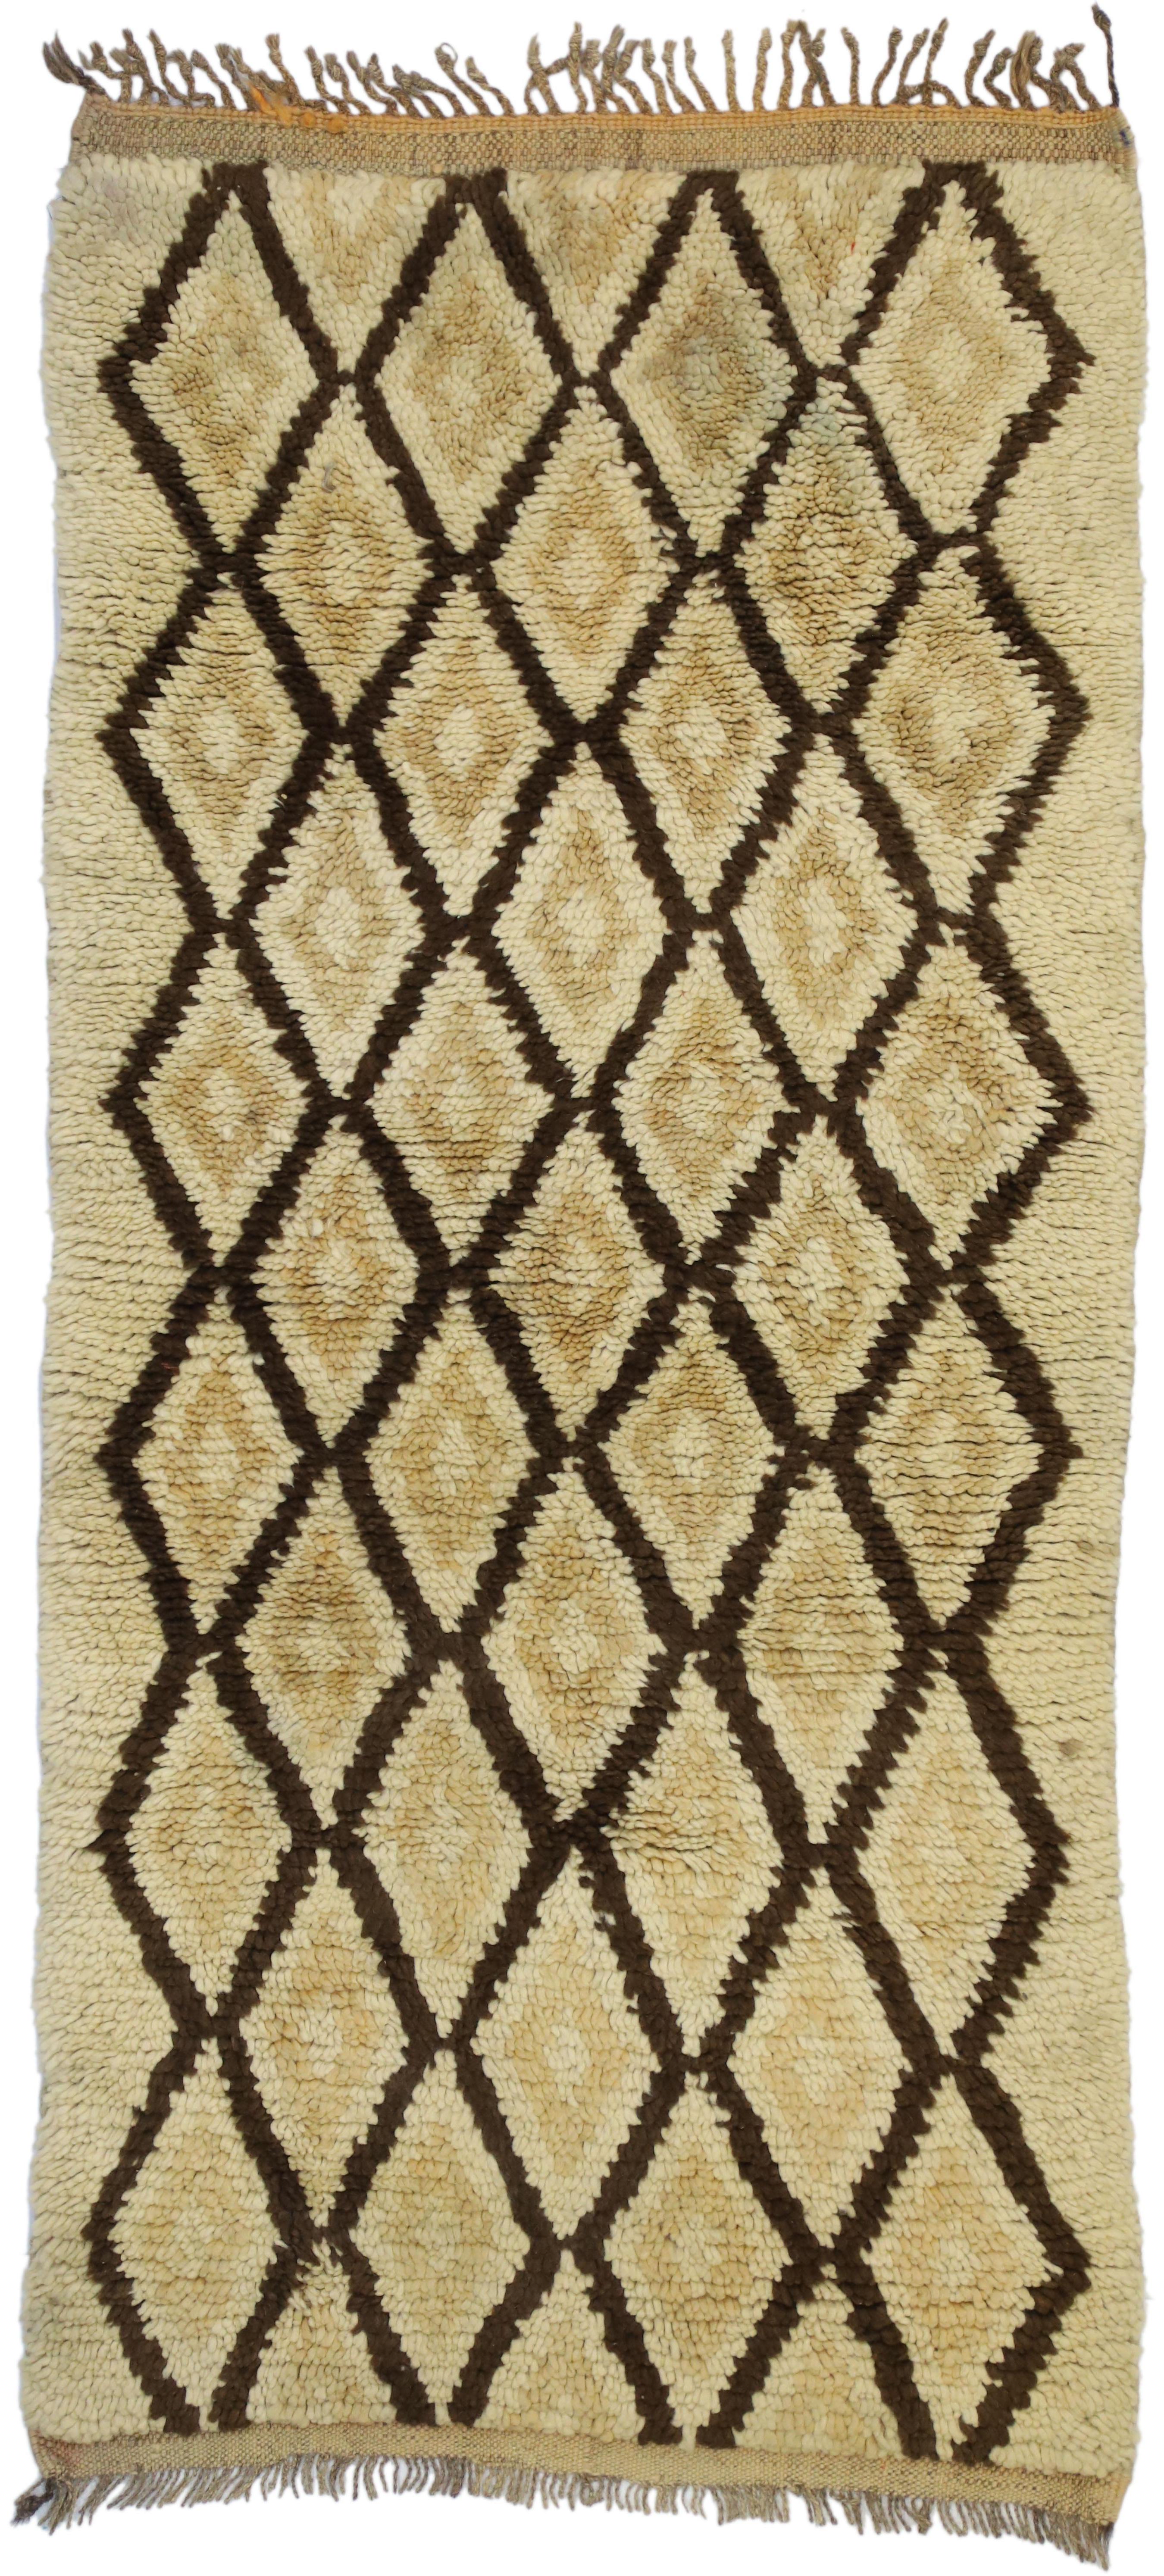 20865 Vintage Berber Moroccan Rug with Tribal Style 02'05 x 05'00. This hand knotted wool vintage Moroccan rug features seven columns of diamond lattices unfolding across an abrashed creamy-beige field. The coffee colored zigzag lines come together